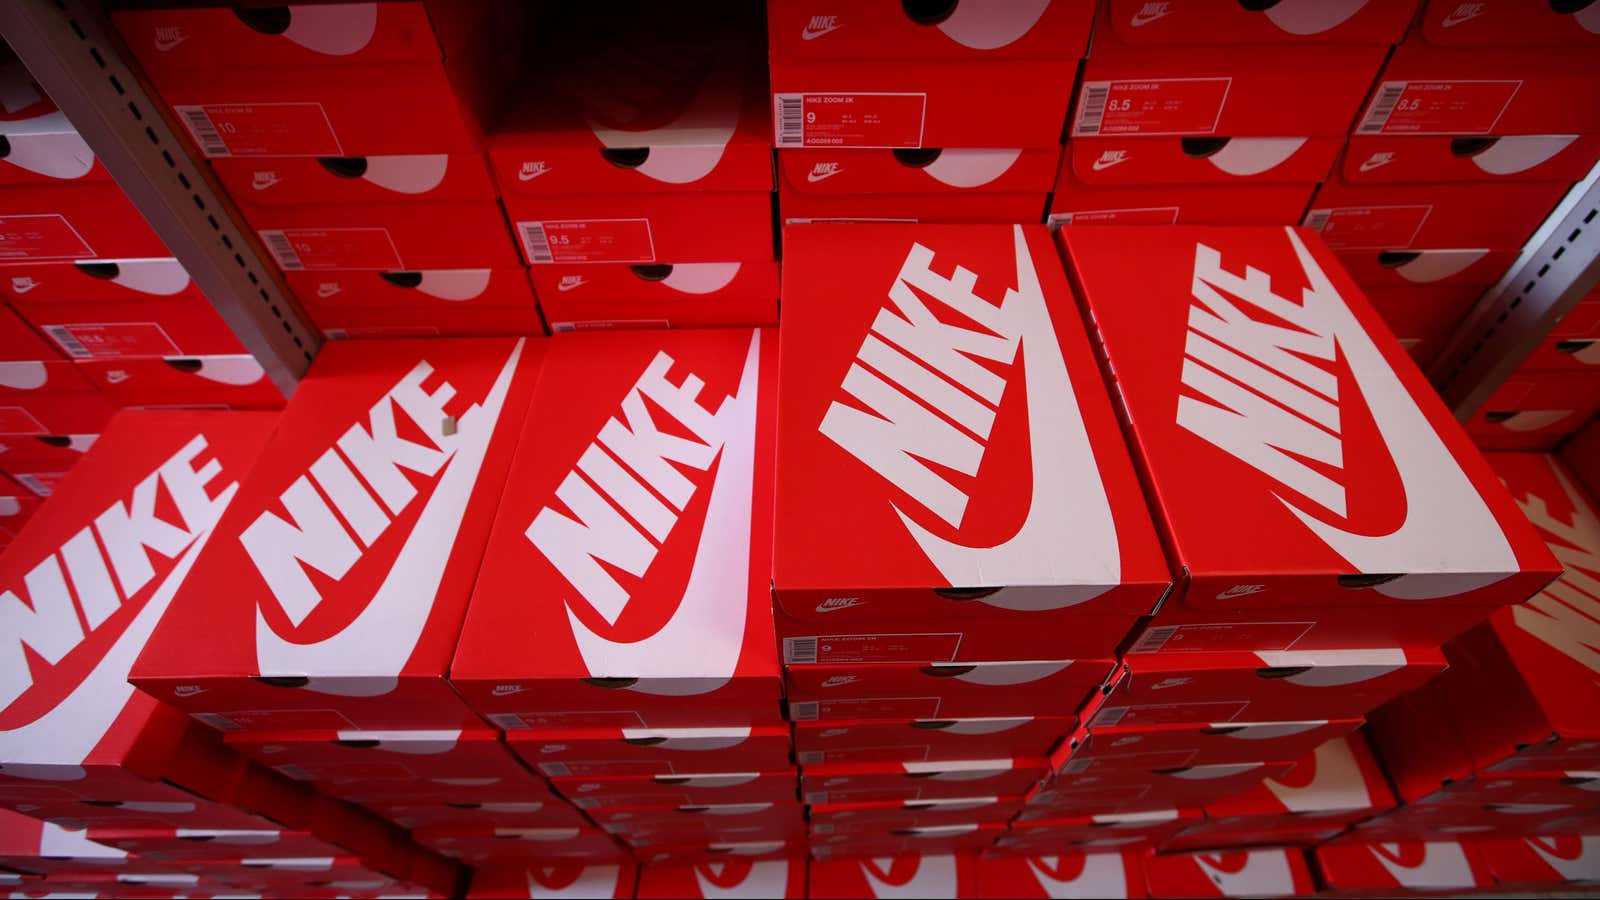 According to a report, Nike is pulling shoes in China made with a brand that waded into politically sensitive waters.